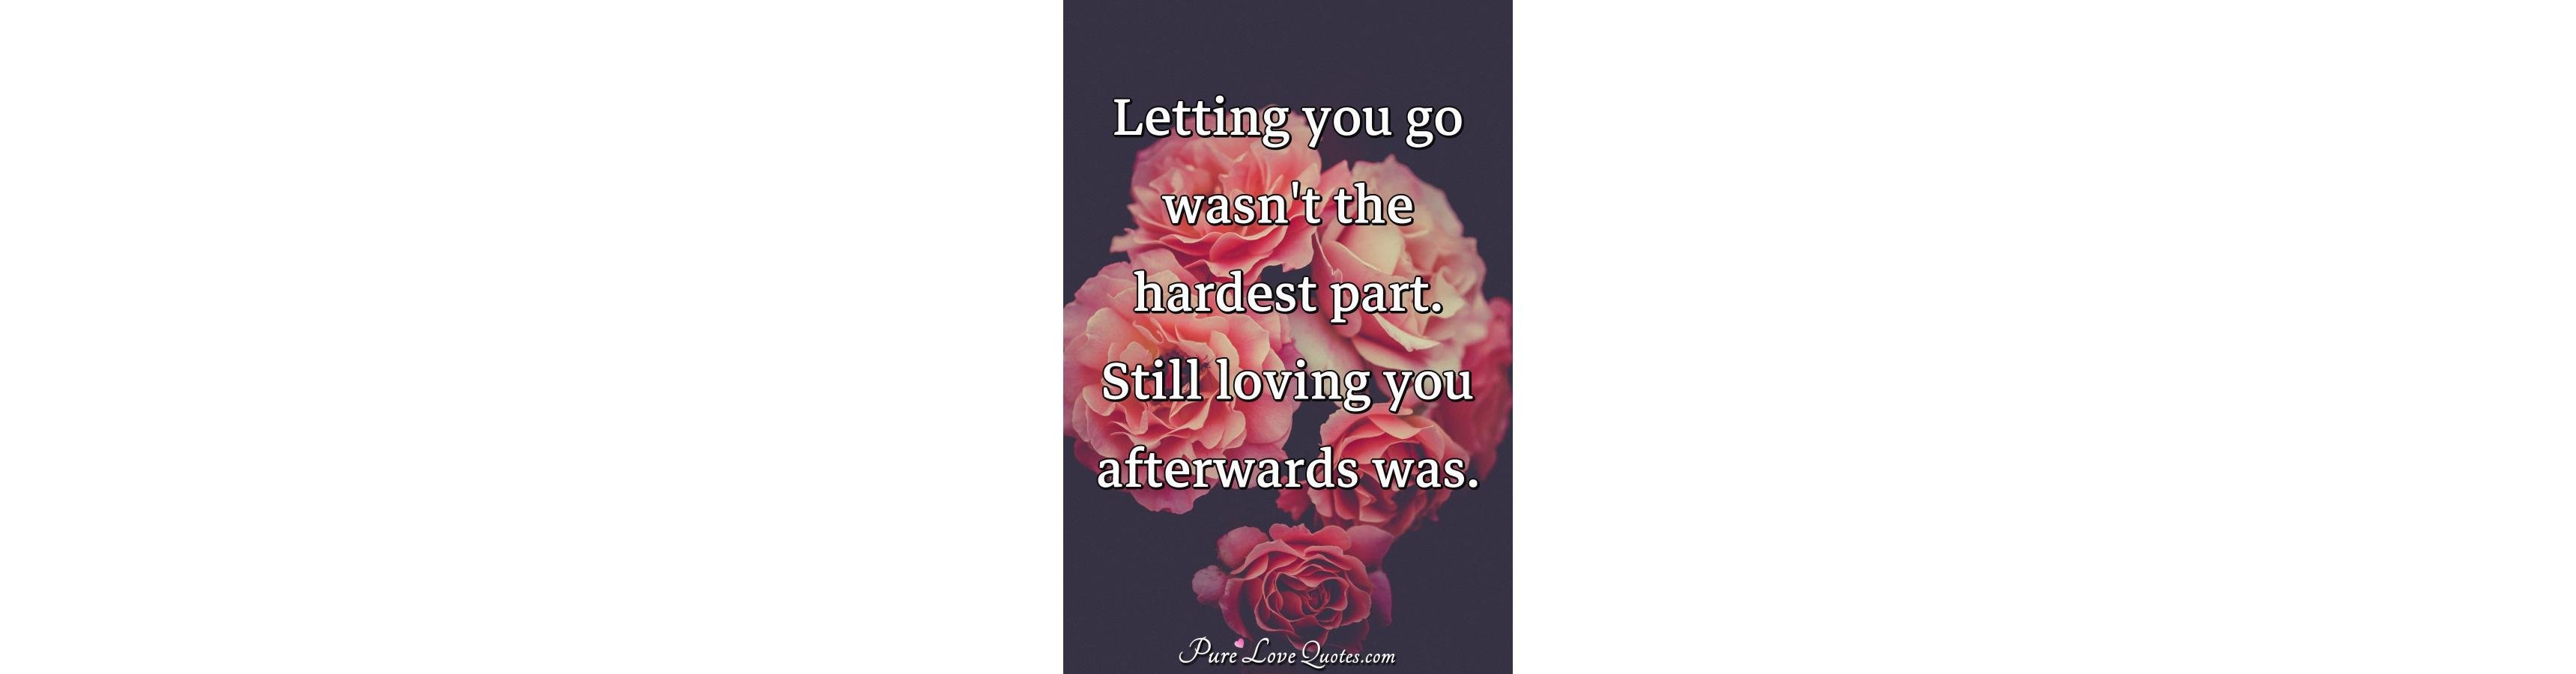 Letting you go wasn't the hardest part. Still loving you 